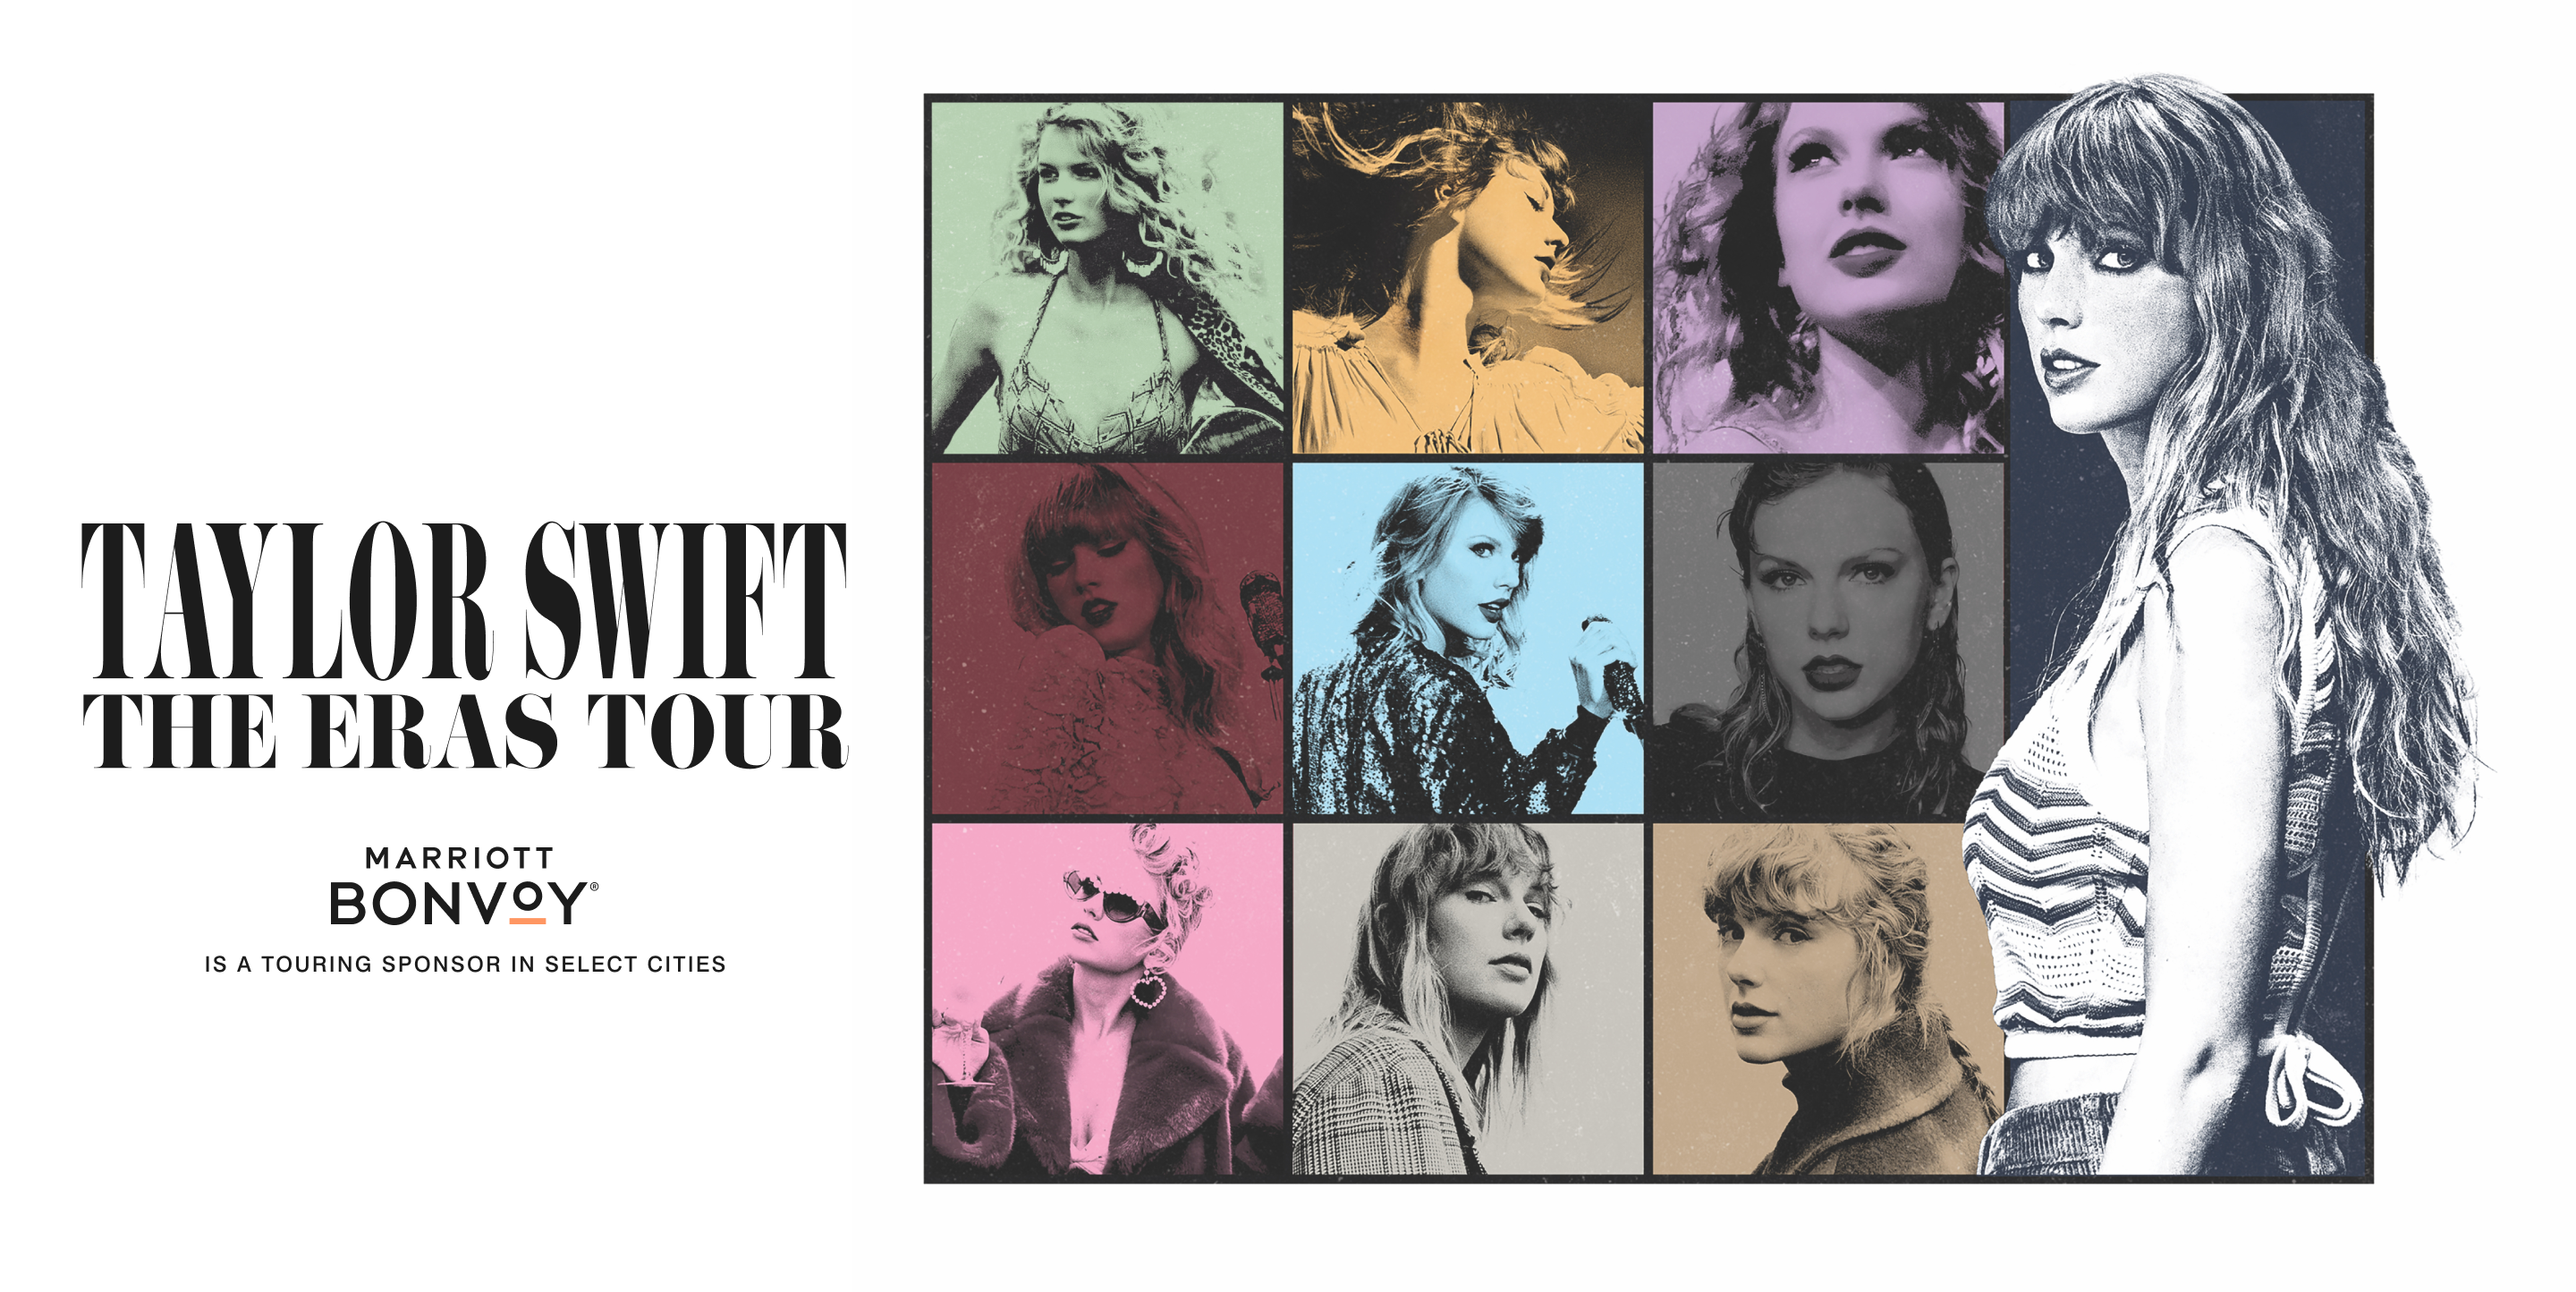 Taylor Swift the Eras Tour. Marriott Bonvoy is a touring sponsor in selected cities.